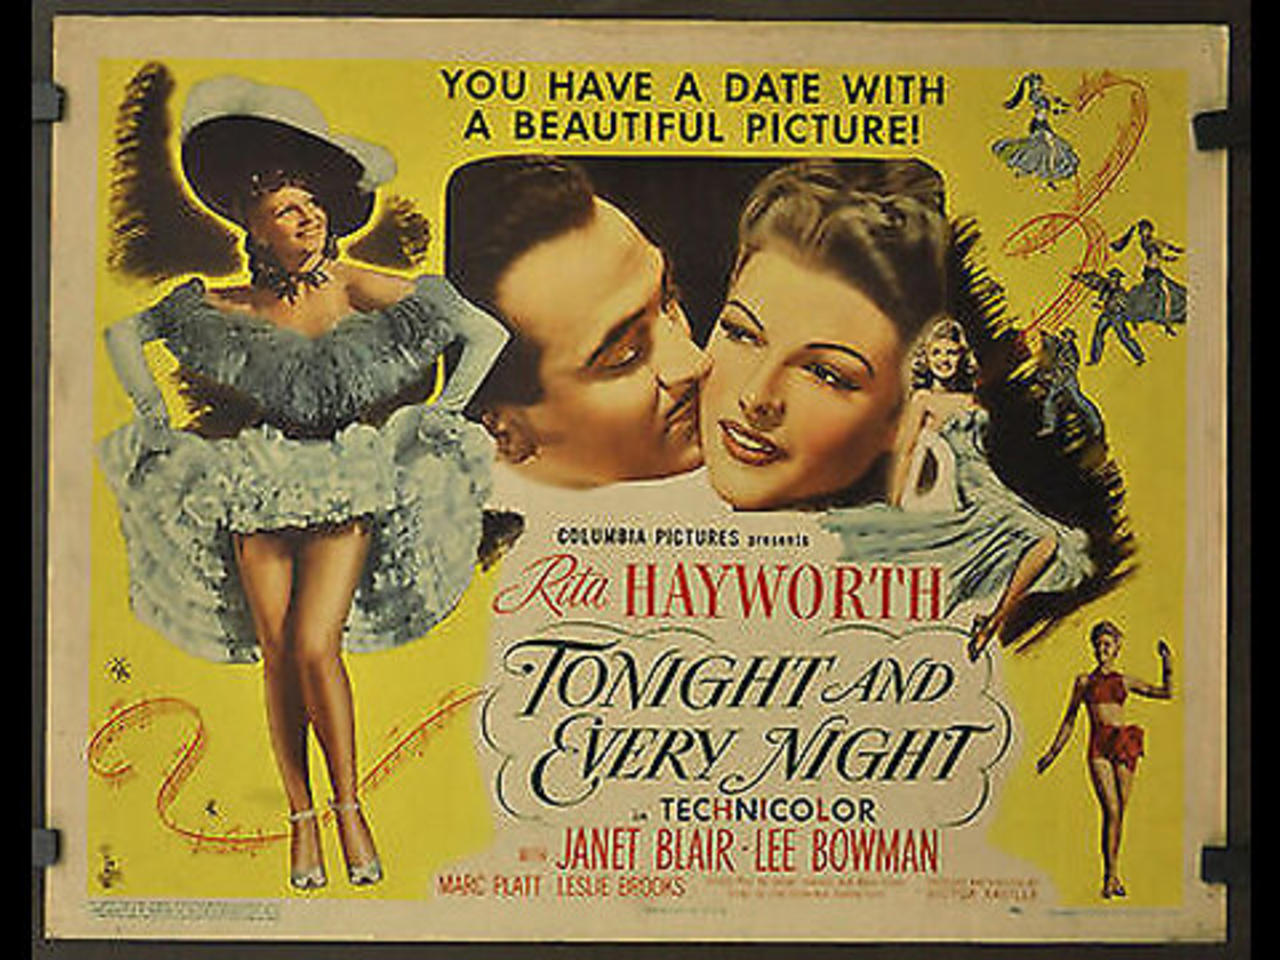 Tonight and Every Night ..... 1945 American musical film trailer